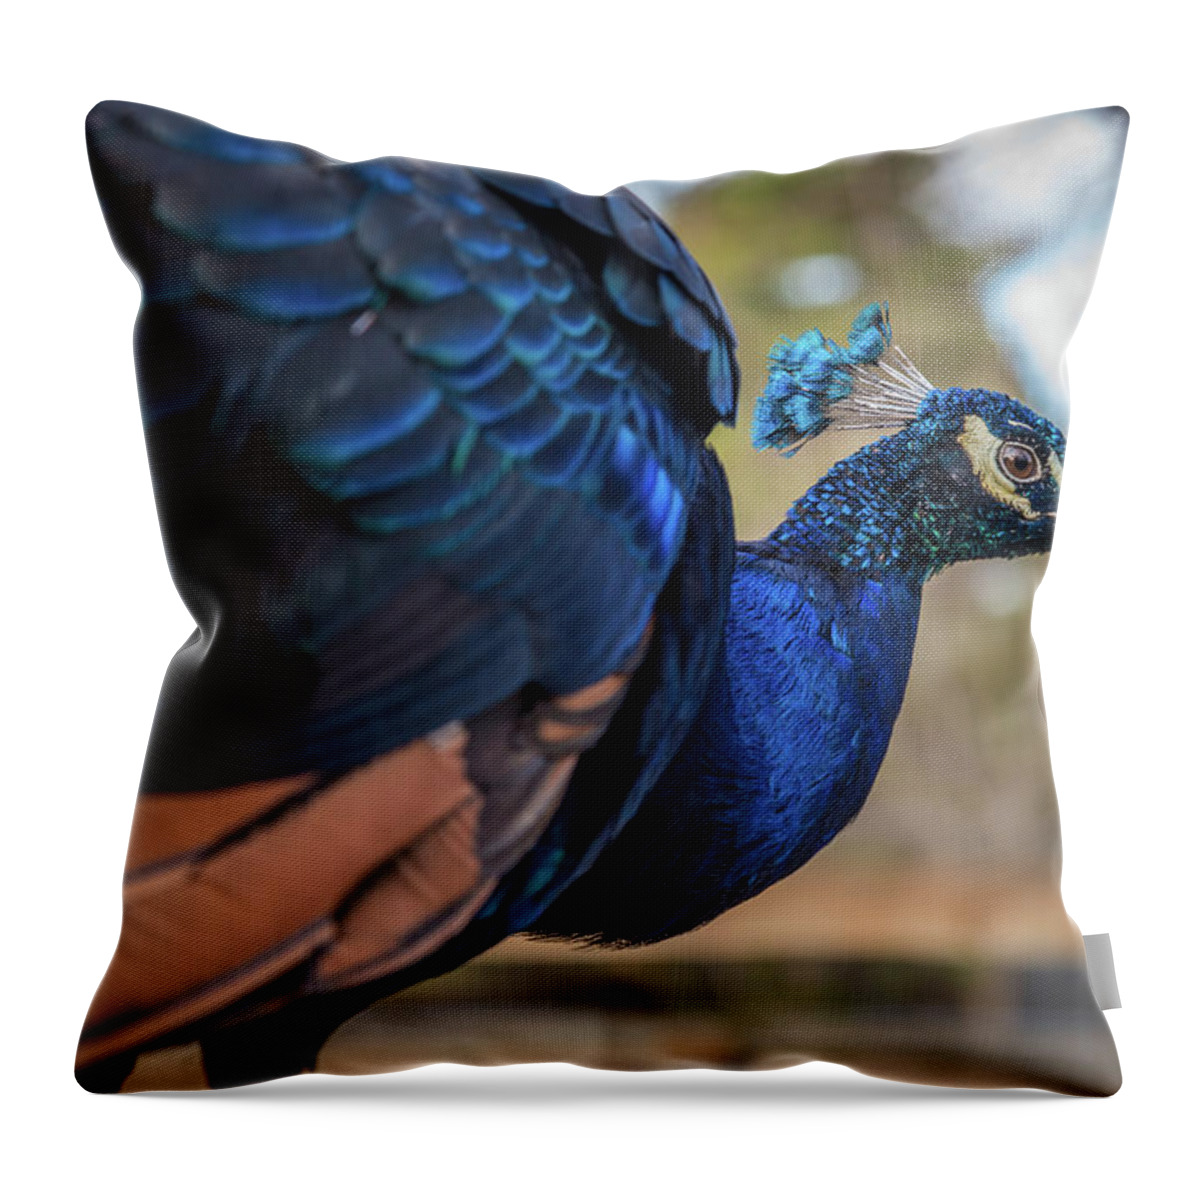 Forked River Throw Pillow featuring the photograph Pretty Bird by Kristopher Schoenleber